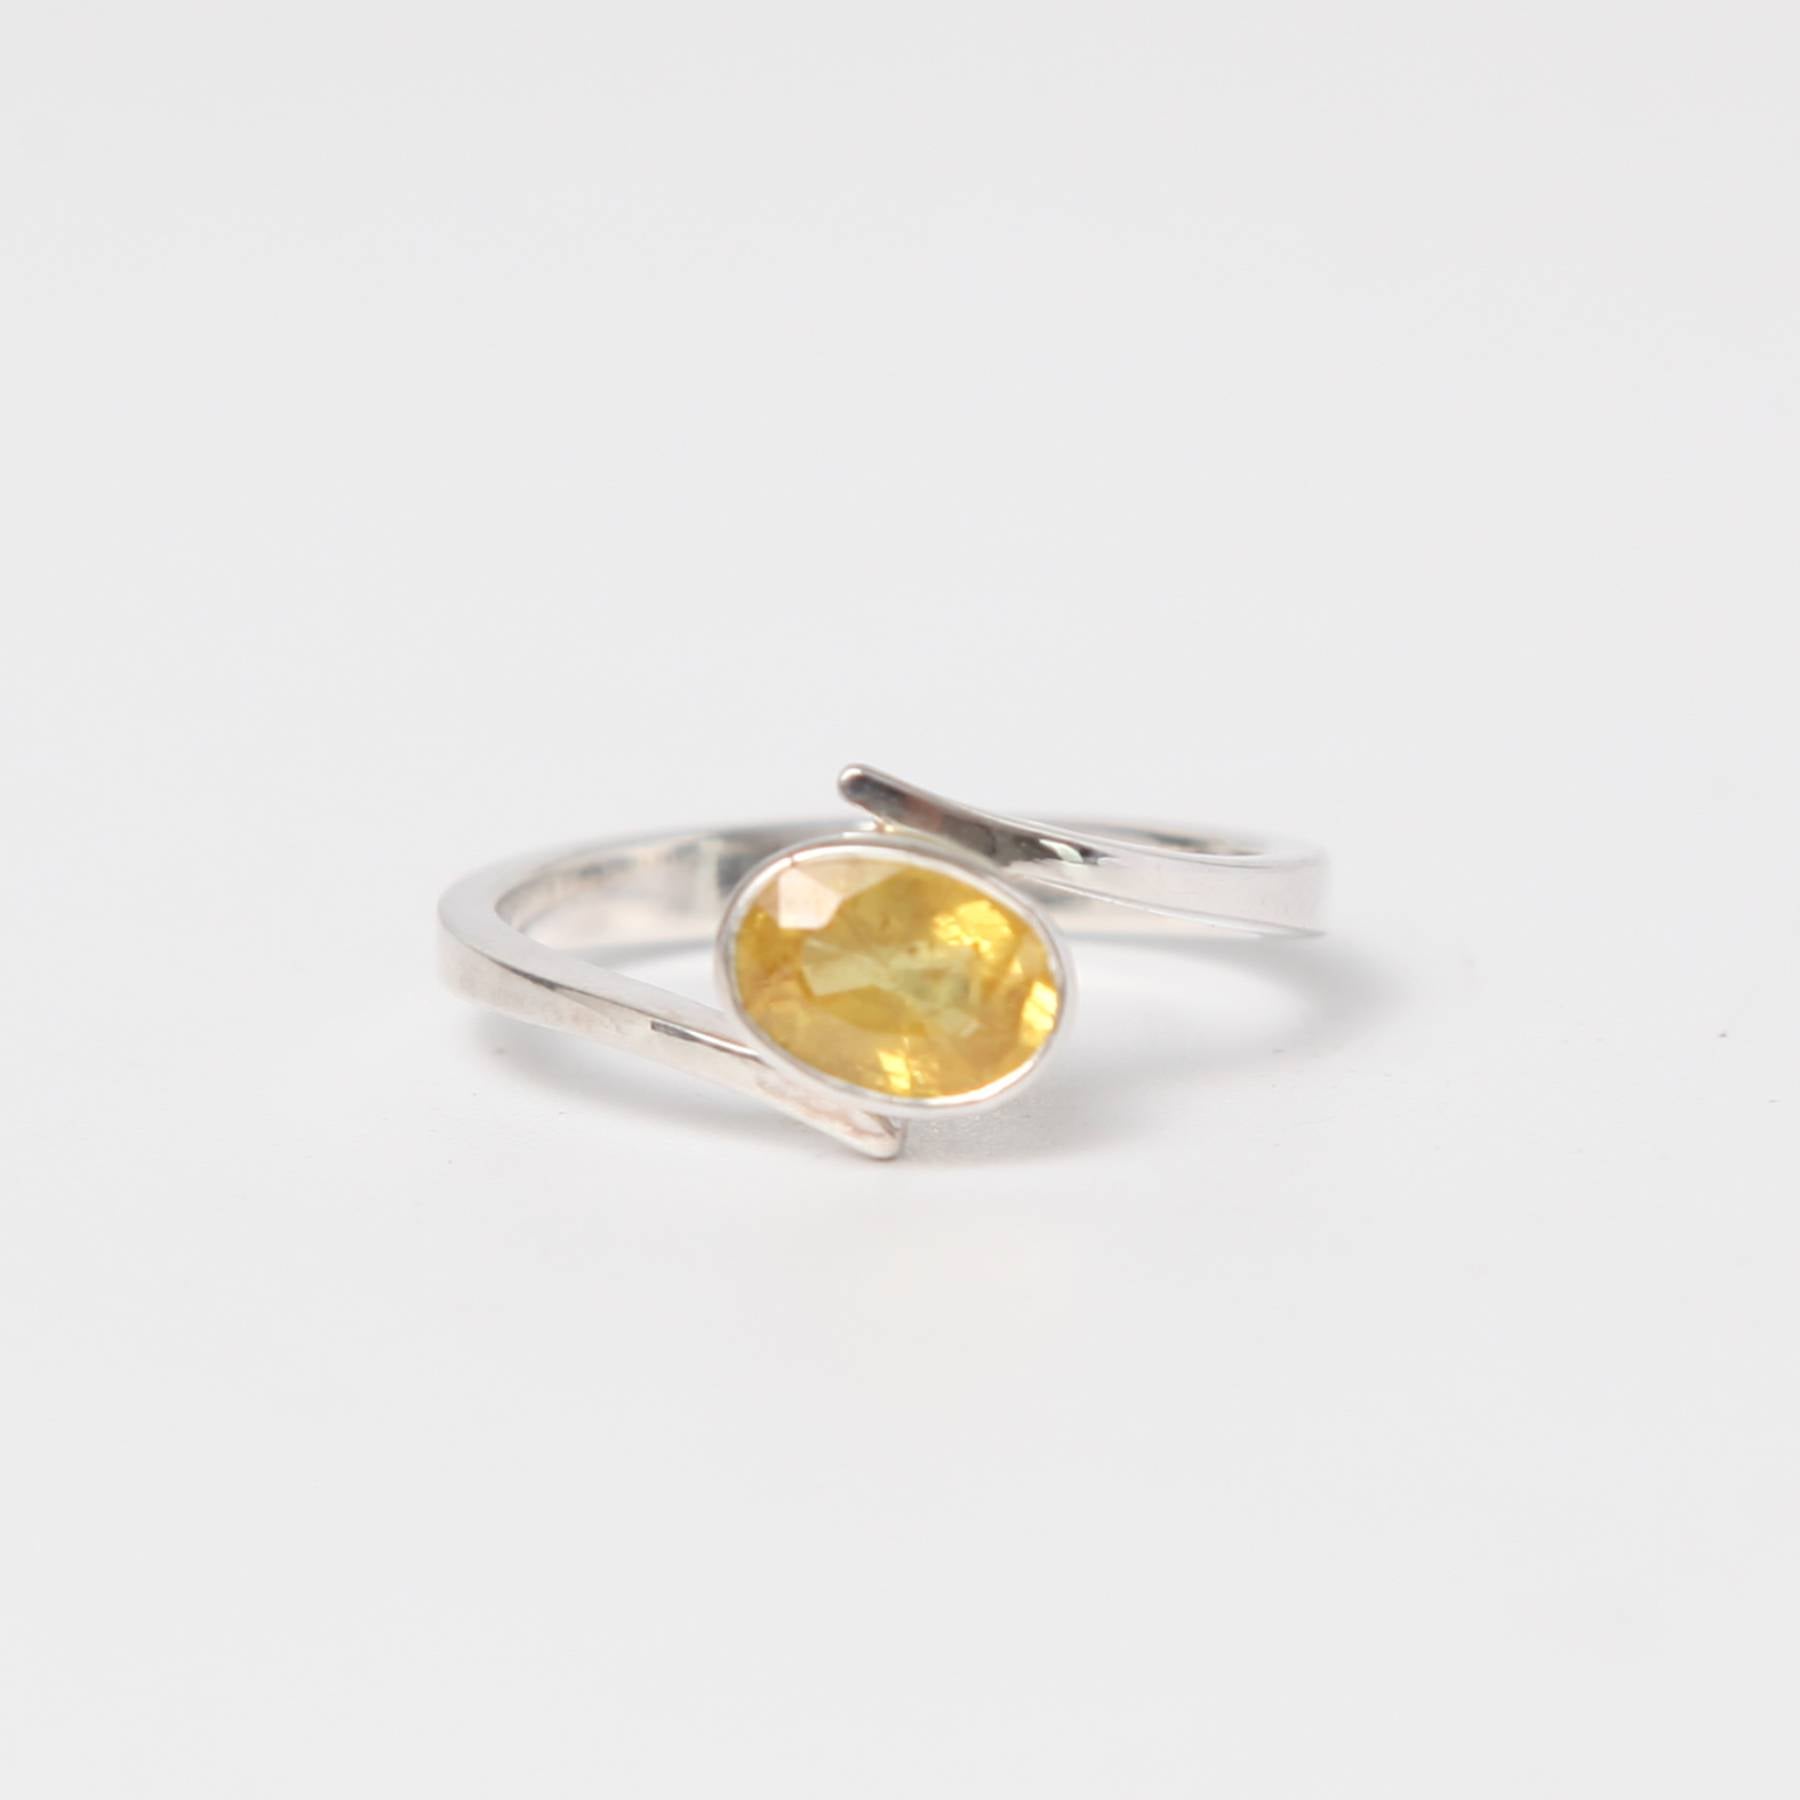 Natural Certified Yellow Sapphire/pukhraj Stone Astrology, Statement Ring  in 925 Sterling Silver for Men Andwomen - Etsy